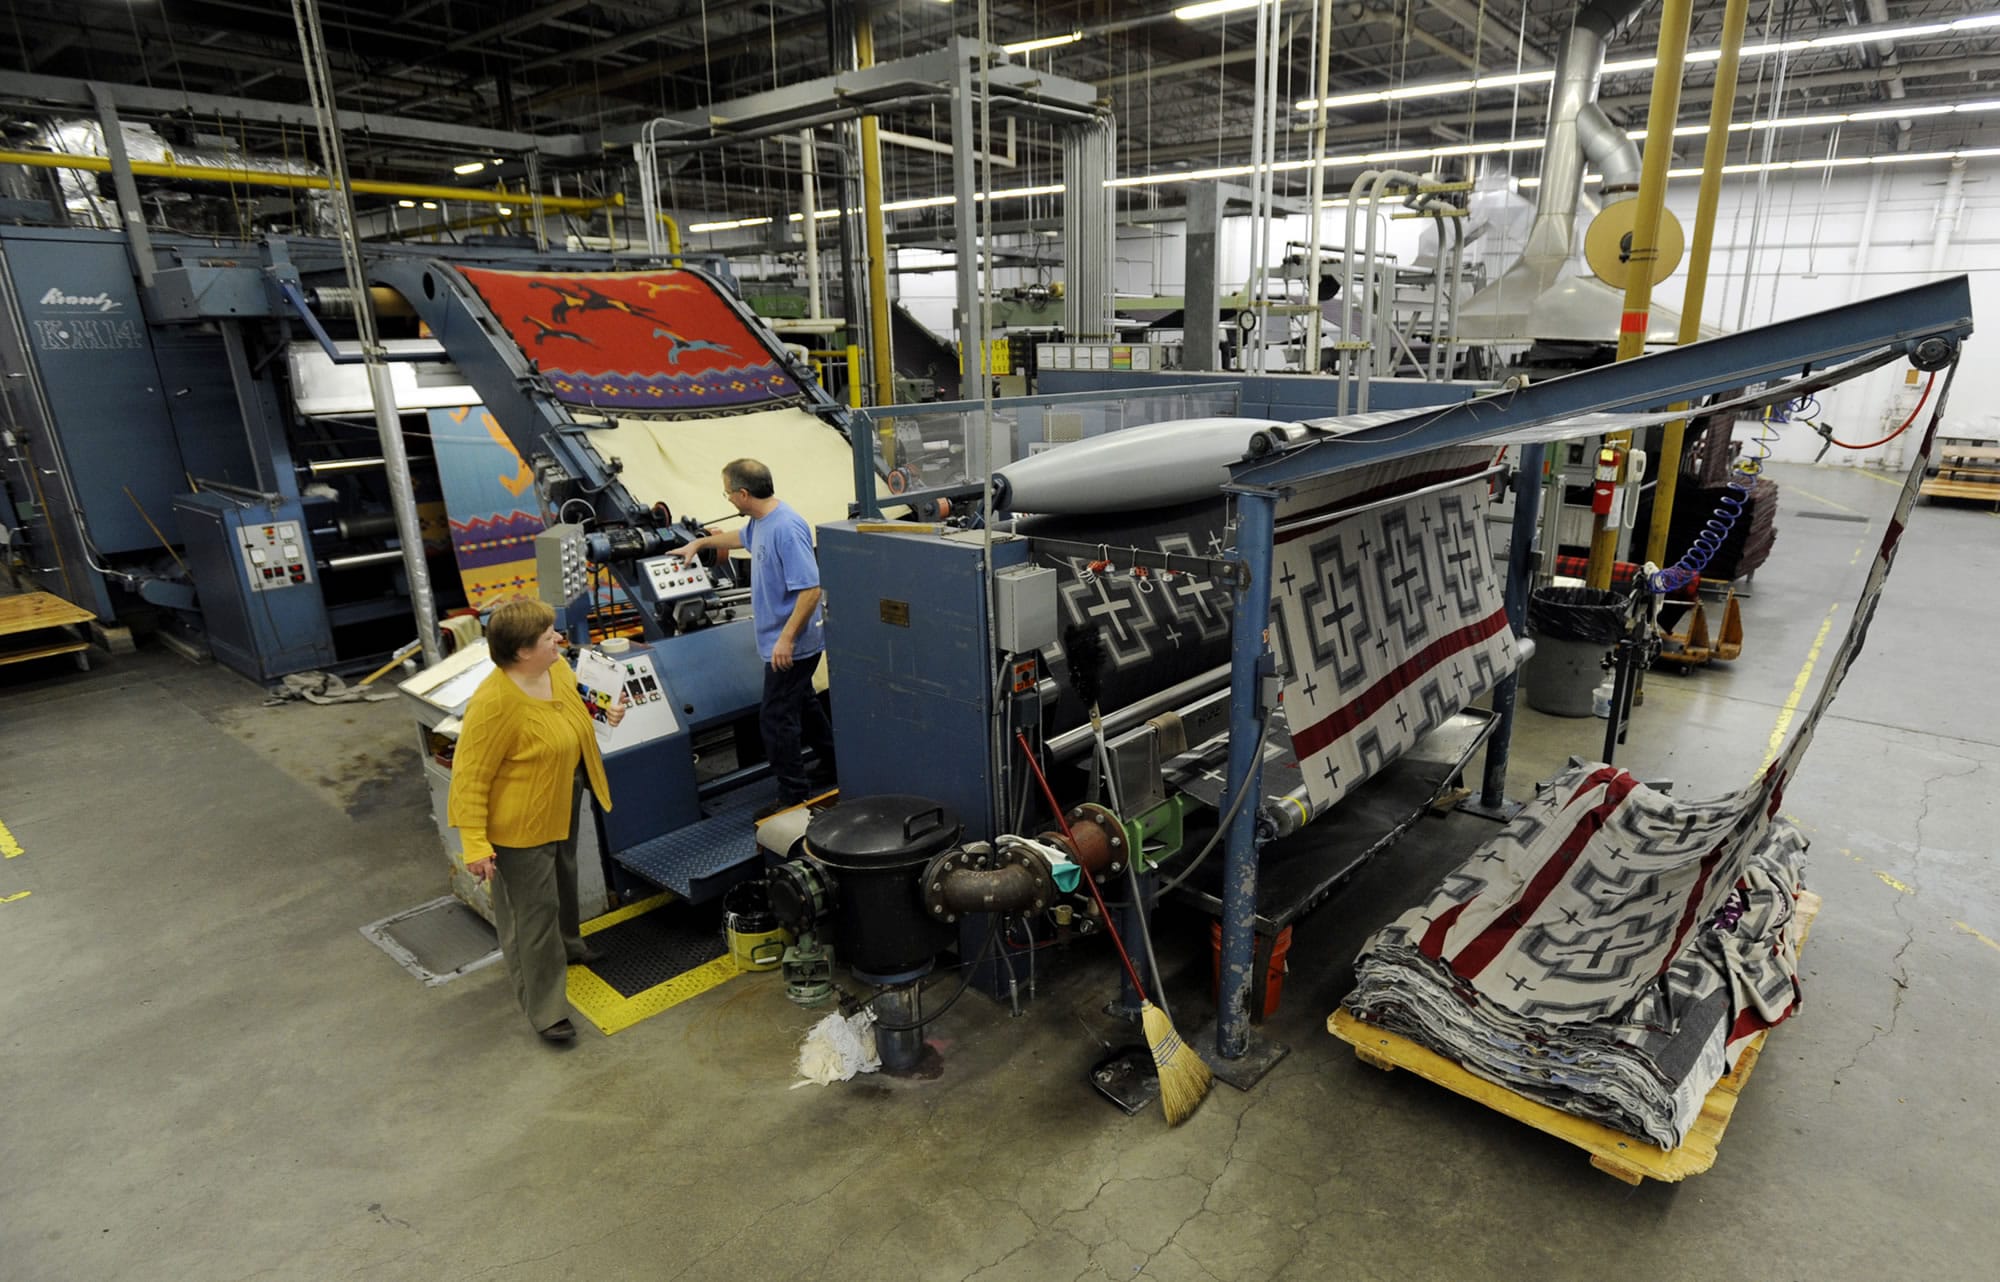 Employees work on the napping machine at the Pendleton Woolen Mills textile mill in Washougal in November.